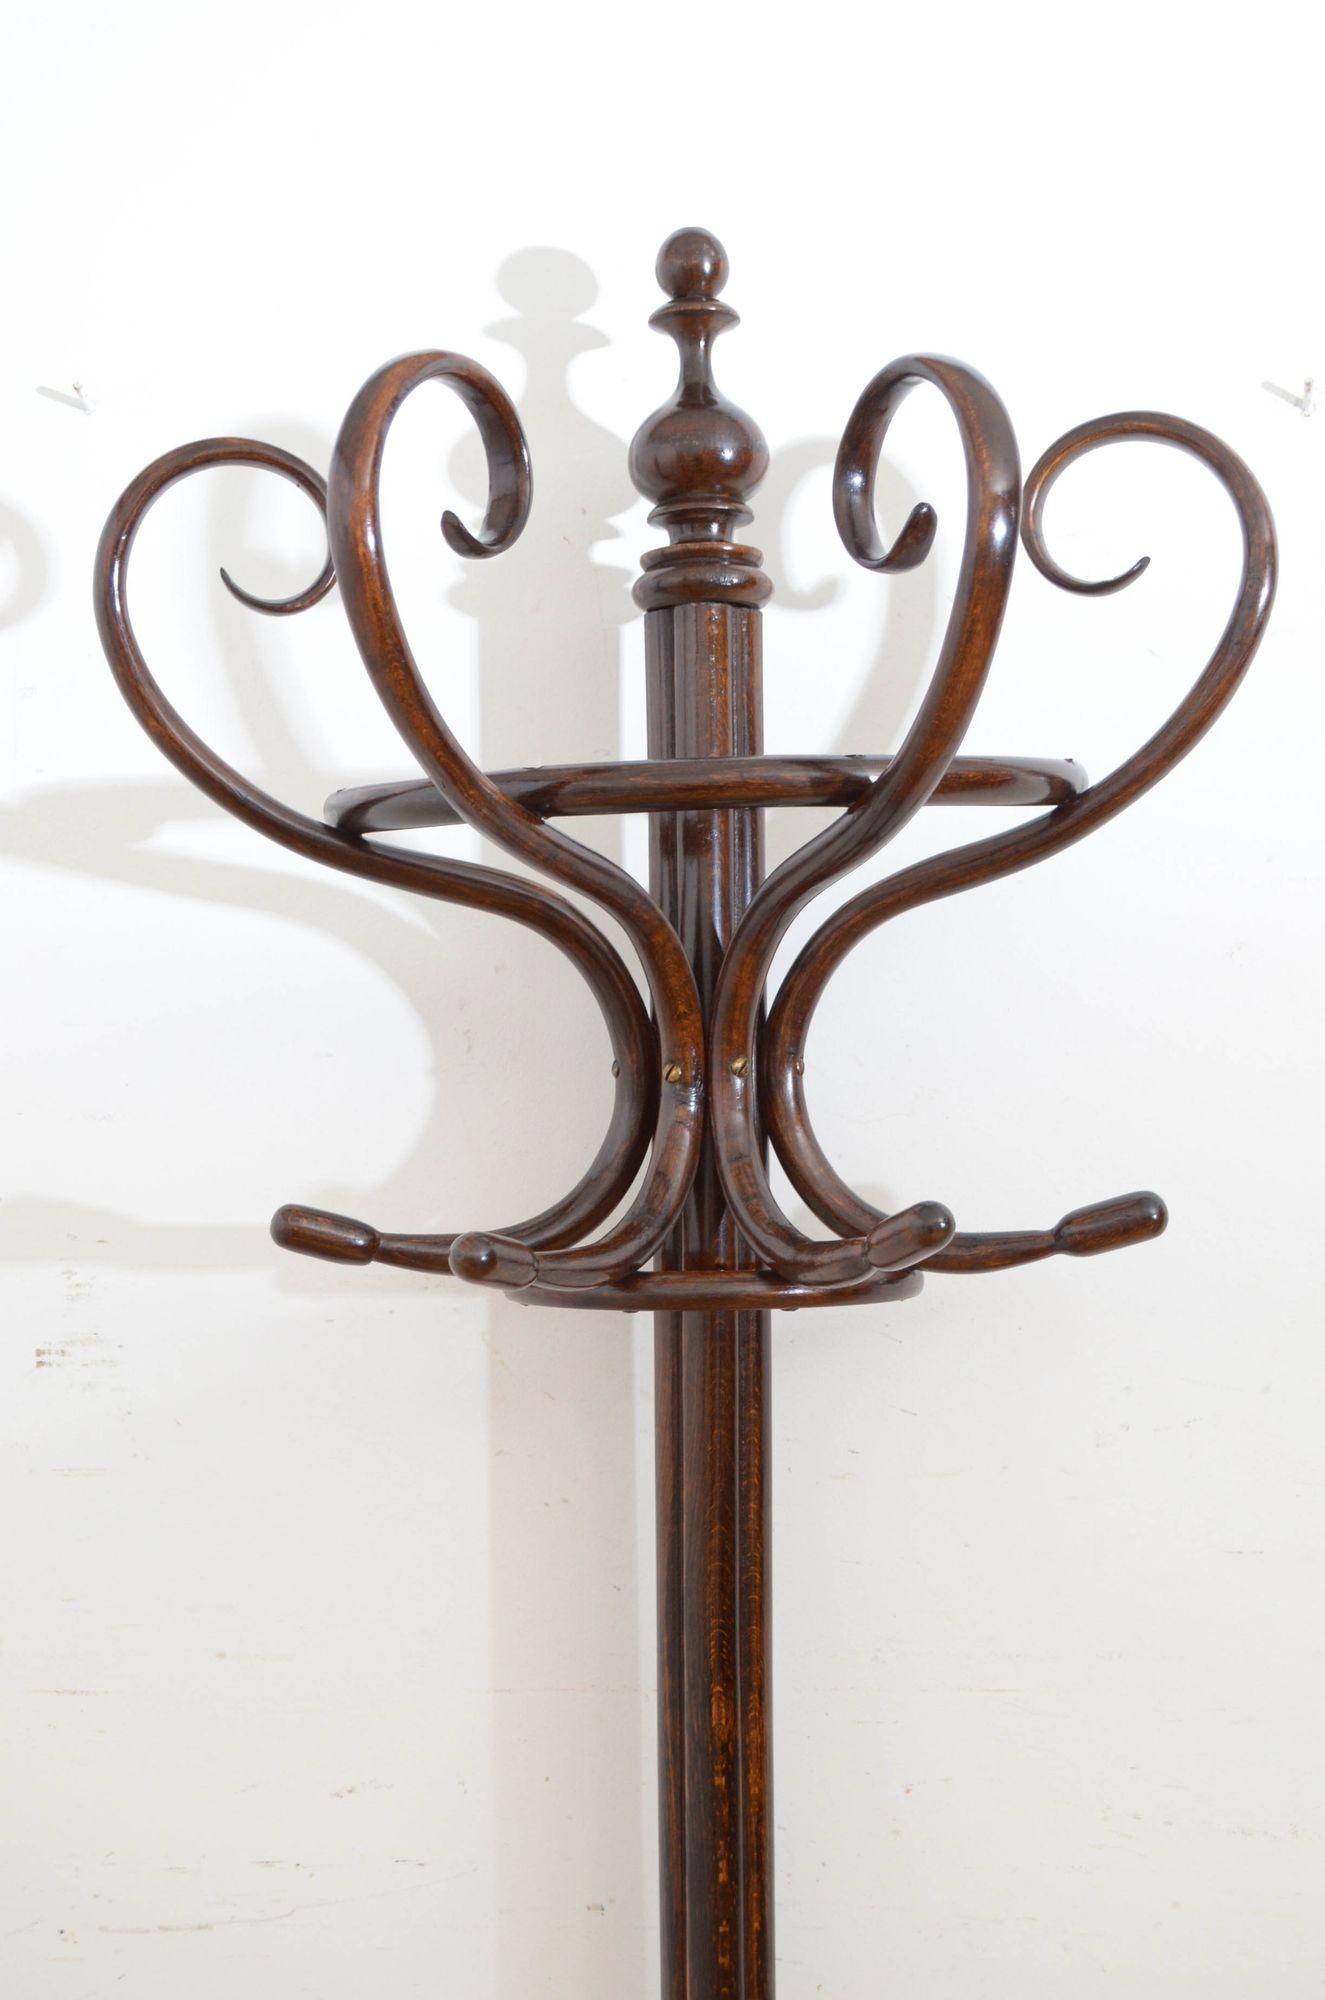 St031 A half round bentwood hat stand, having four coat hooks and four bentwood scrolls for hats, surmounted by a turned finial, supported on cluster column terminating in three downswept legs with a ring for sticks and umbrellas. Ready to place at